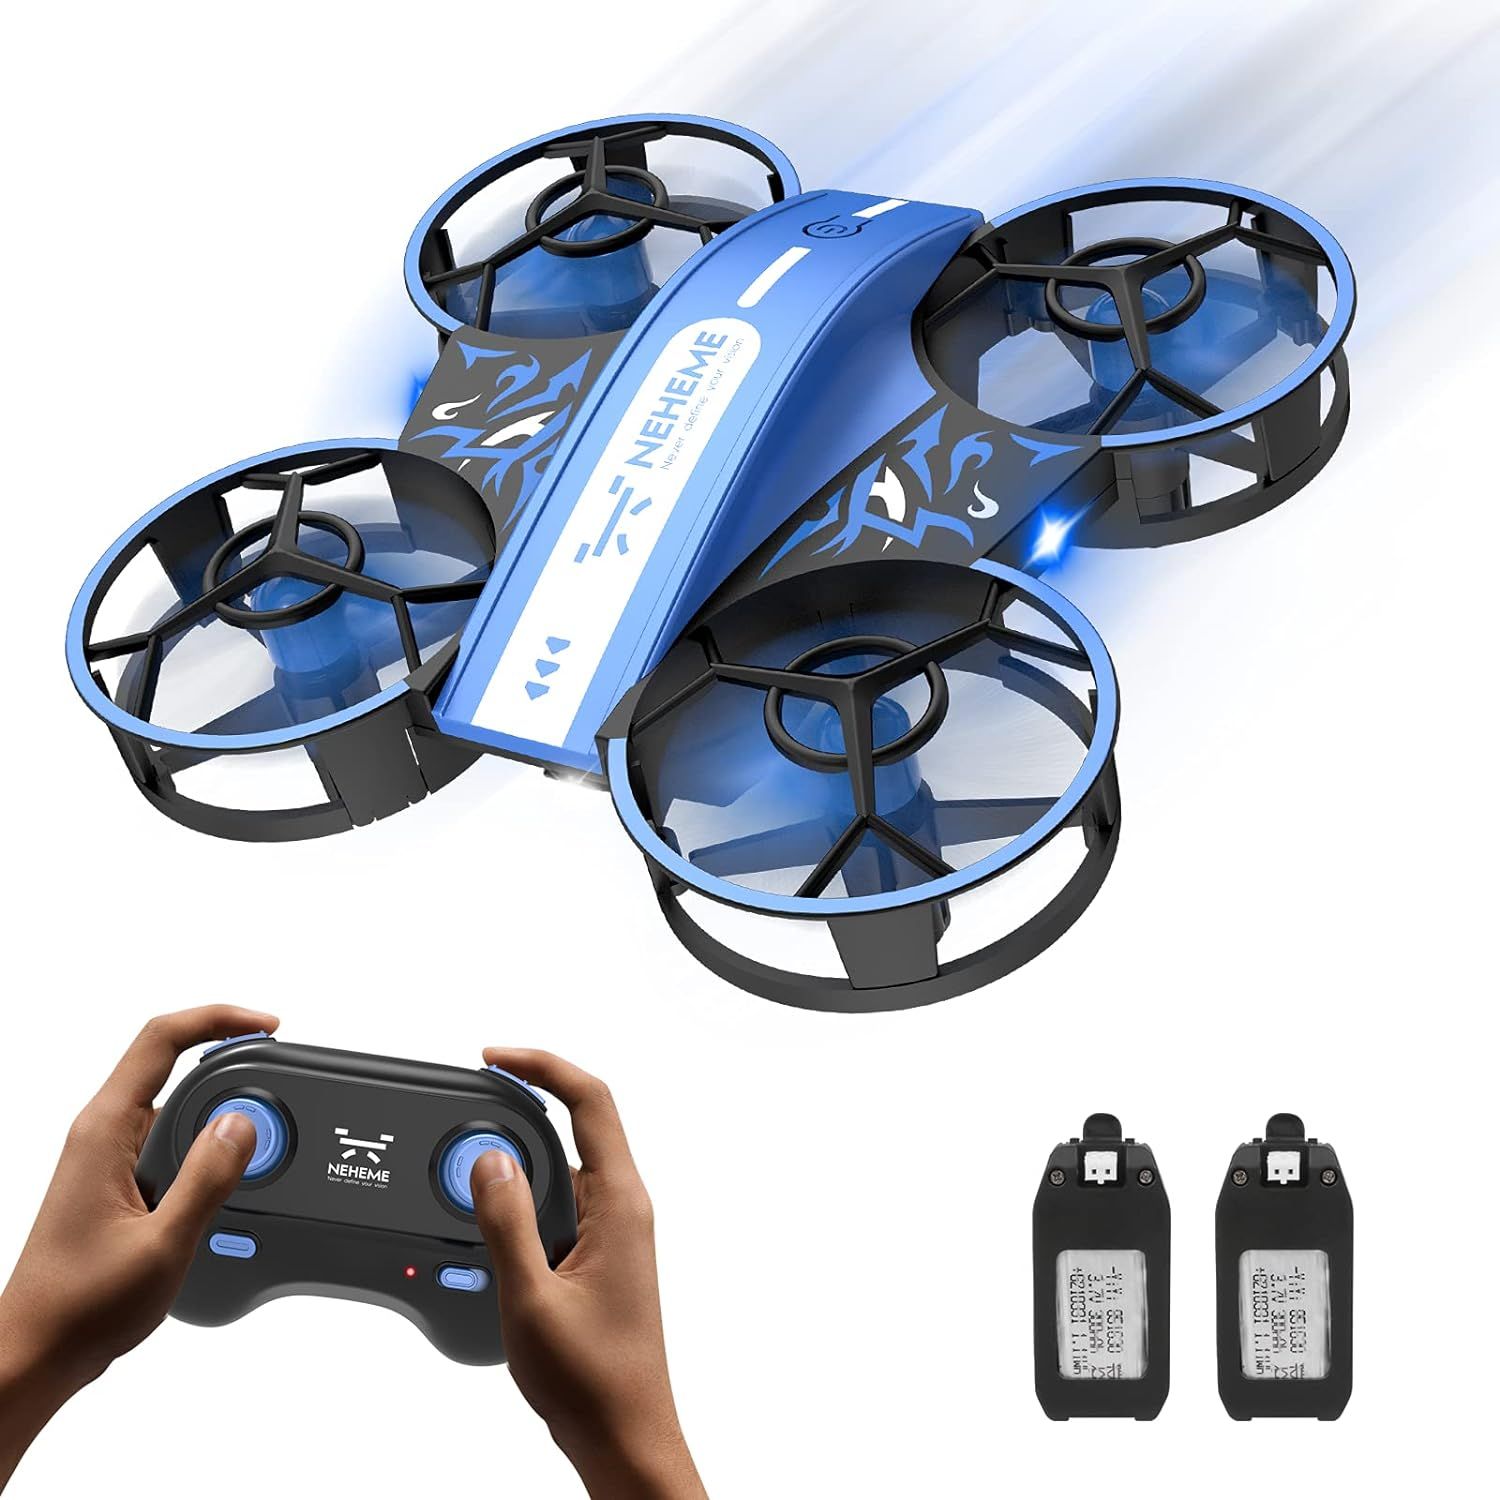 NEHEME NH330 Drone for Kids and Beginner, Mini Drone with Auto Hover, Headless Mode, 3D Flip and ... | Amazon (US)